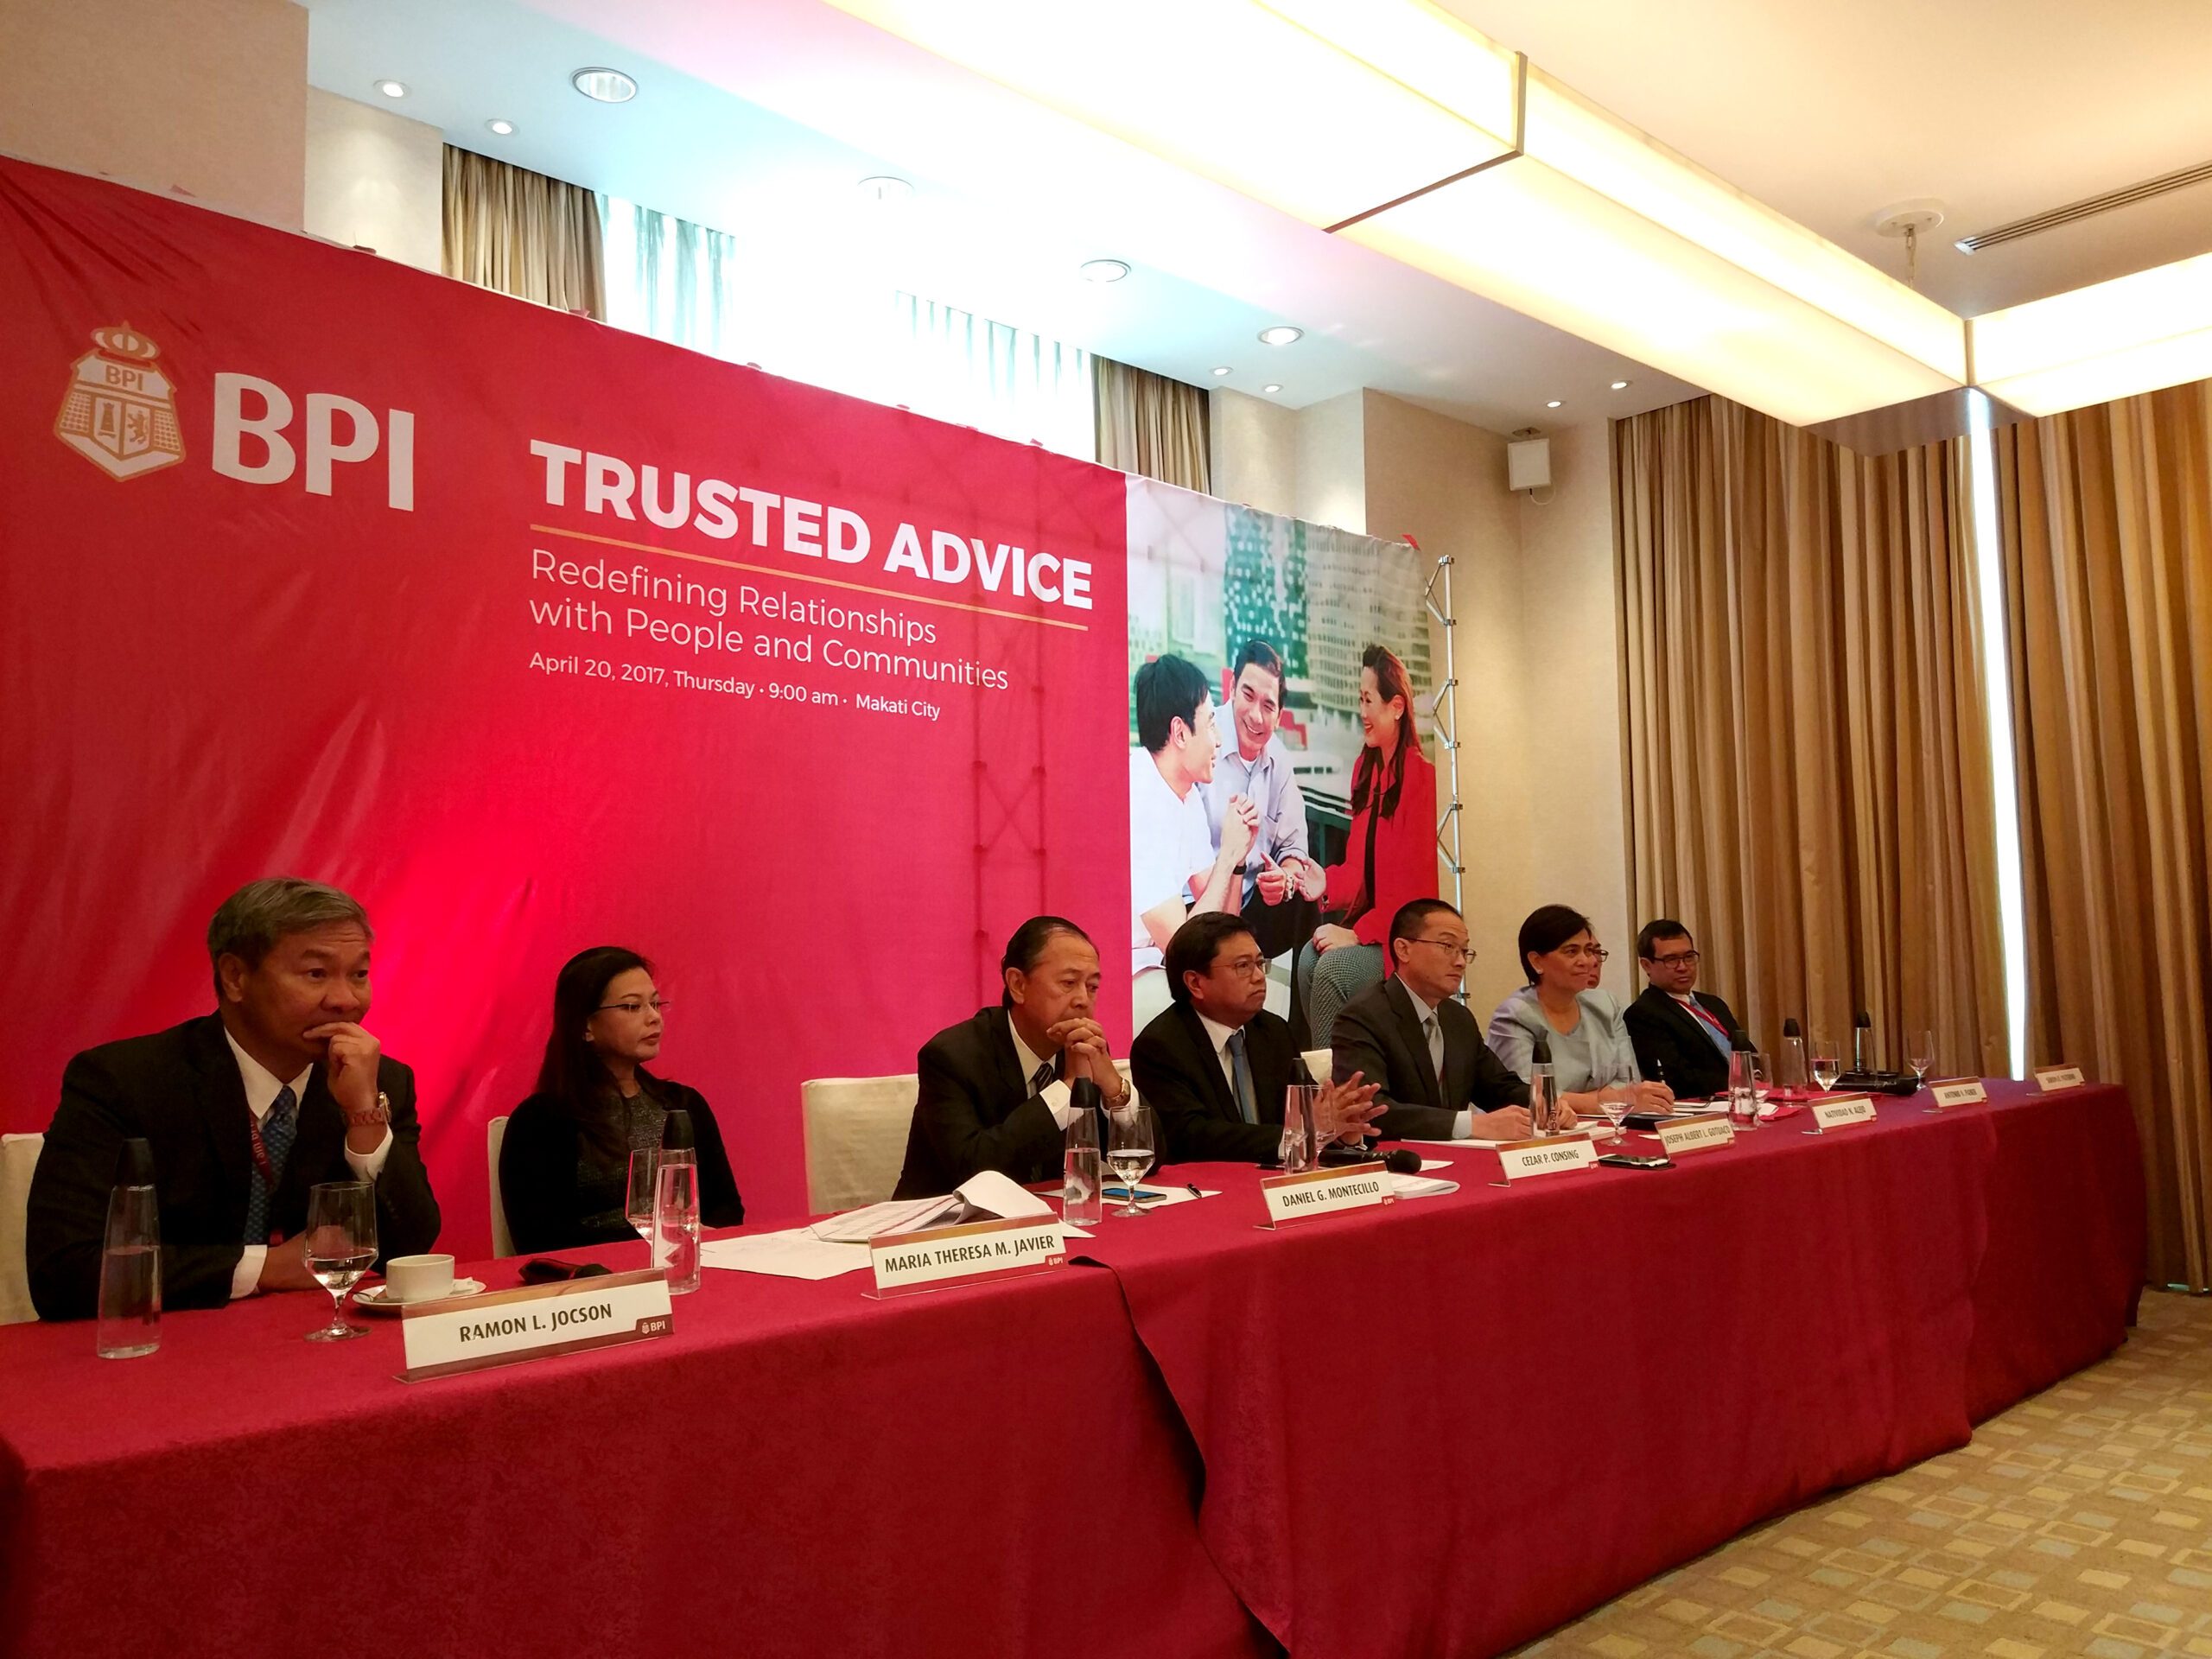 BPI net income up slightly to P22.42 billion in 2017